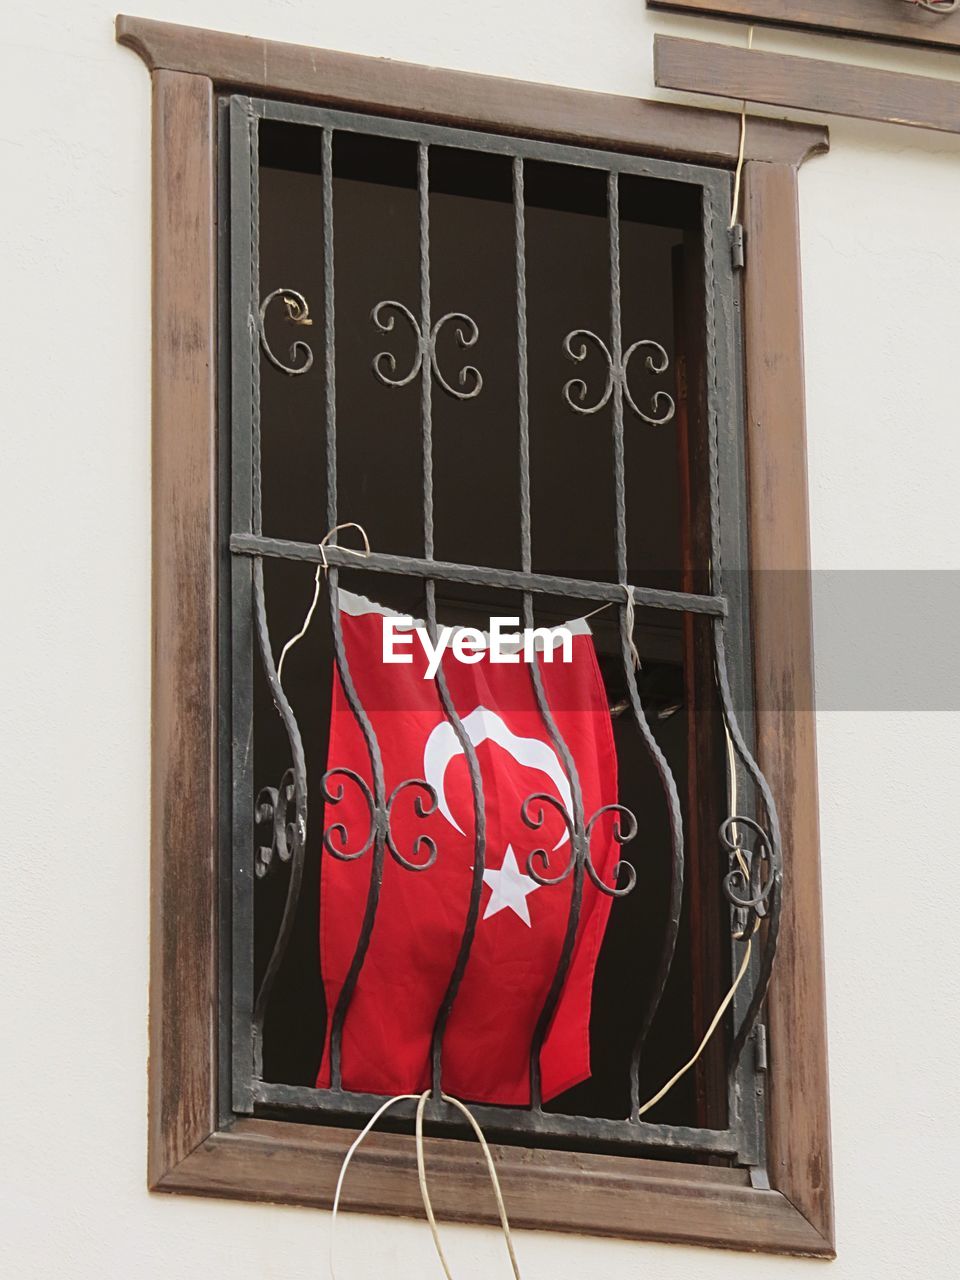 Turkish flag hanging from barred window